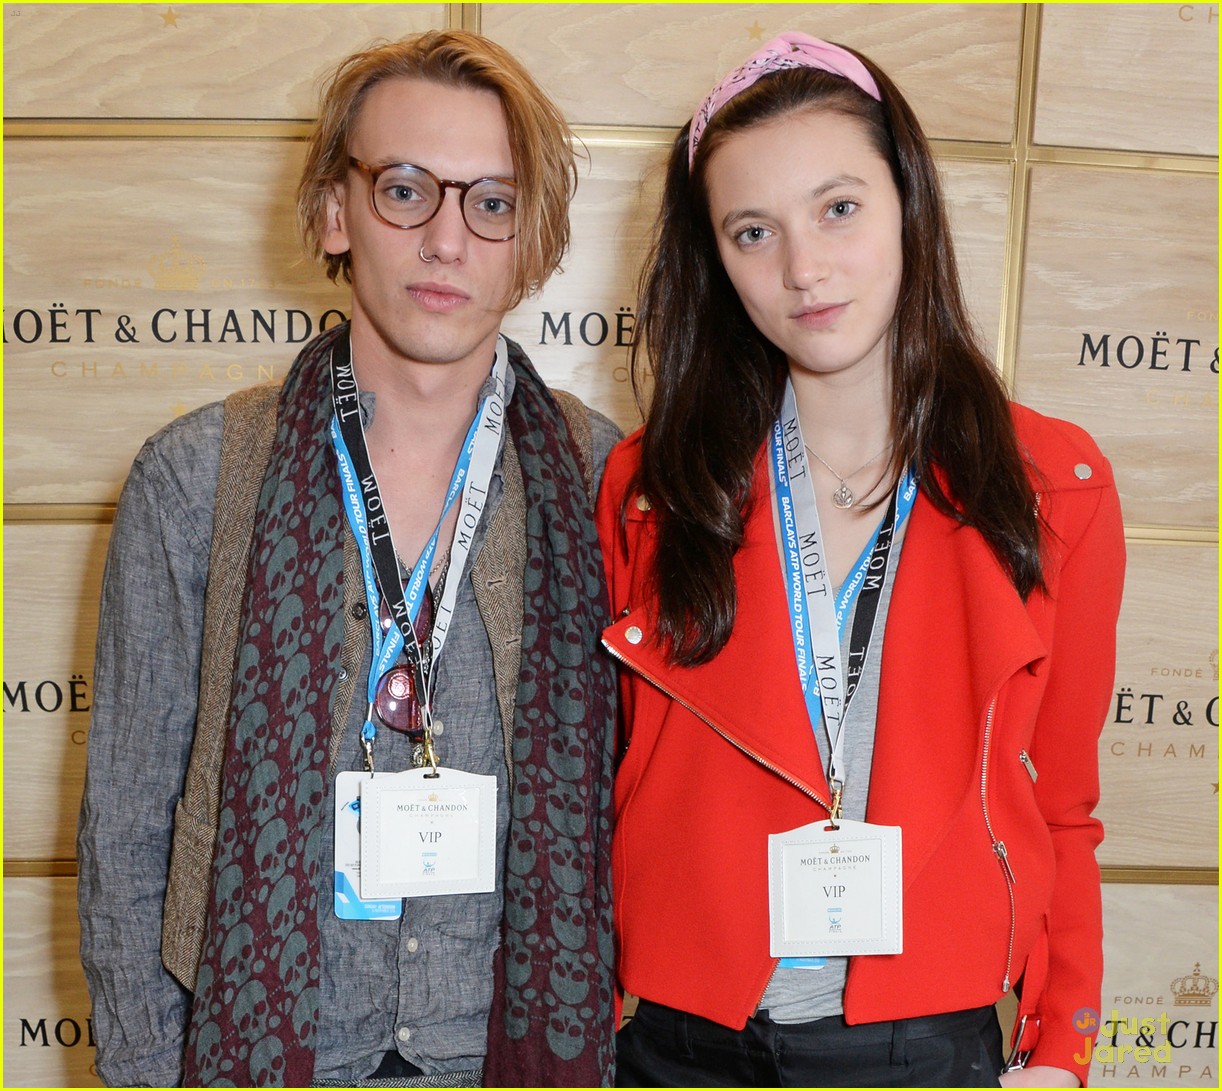 jamie campbell bower matilda lowther make one very cute couple 04